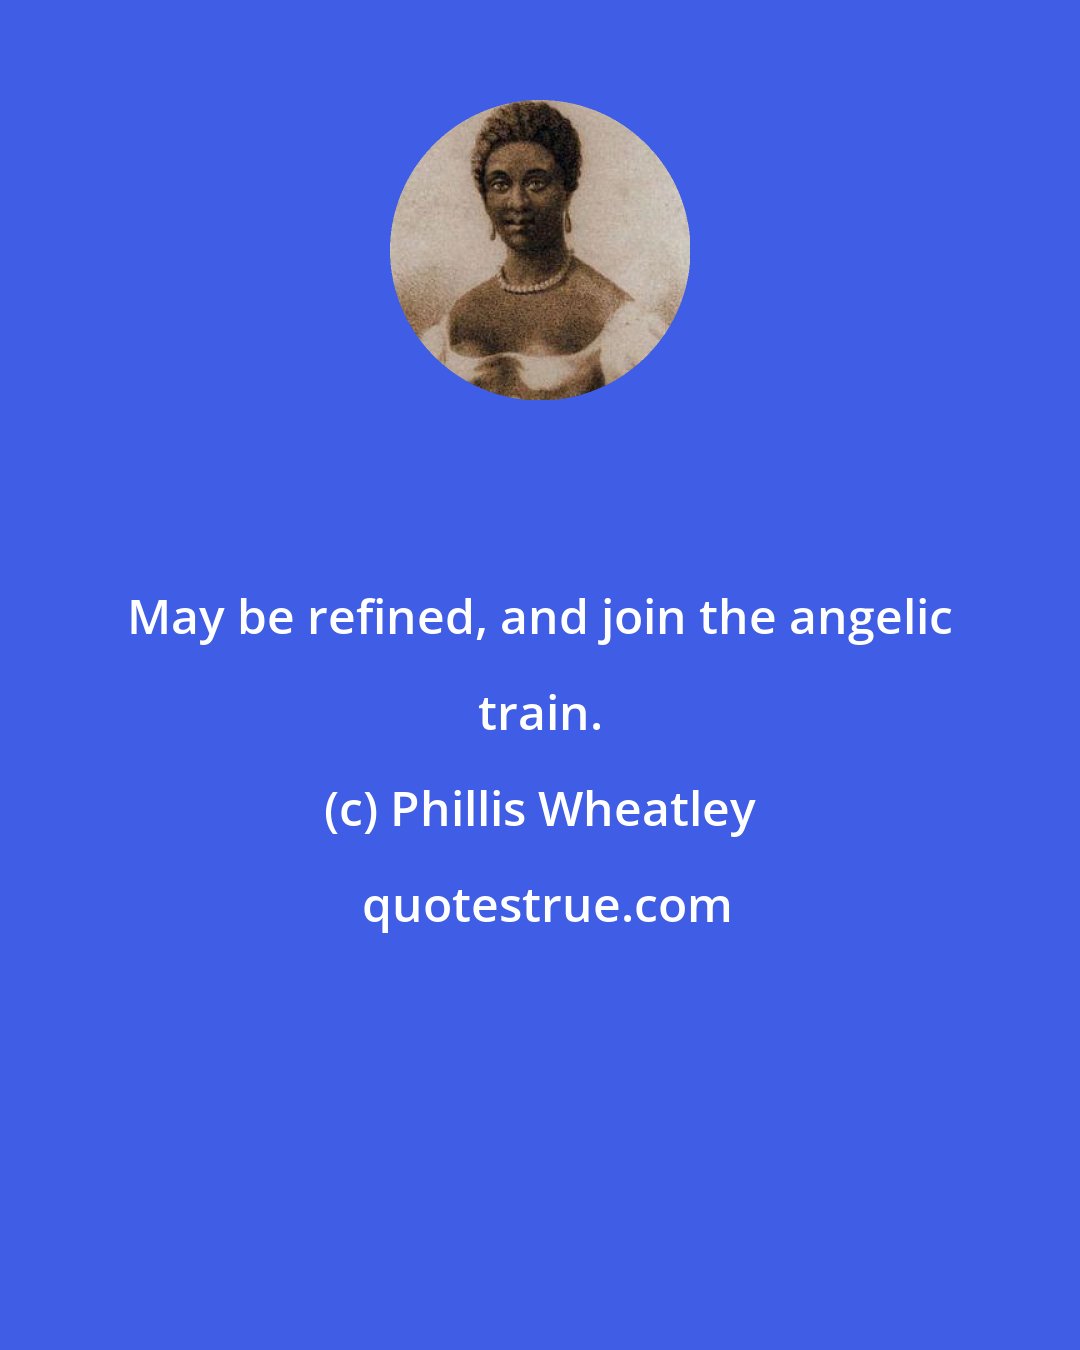 Phillis Wheatley: May be refined, and join the angelic train.